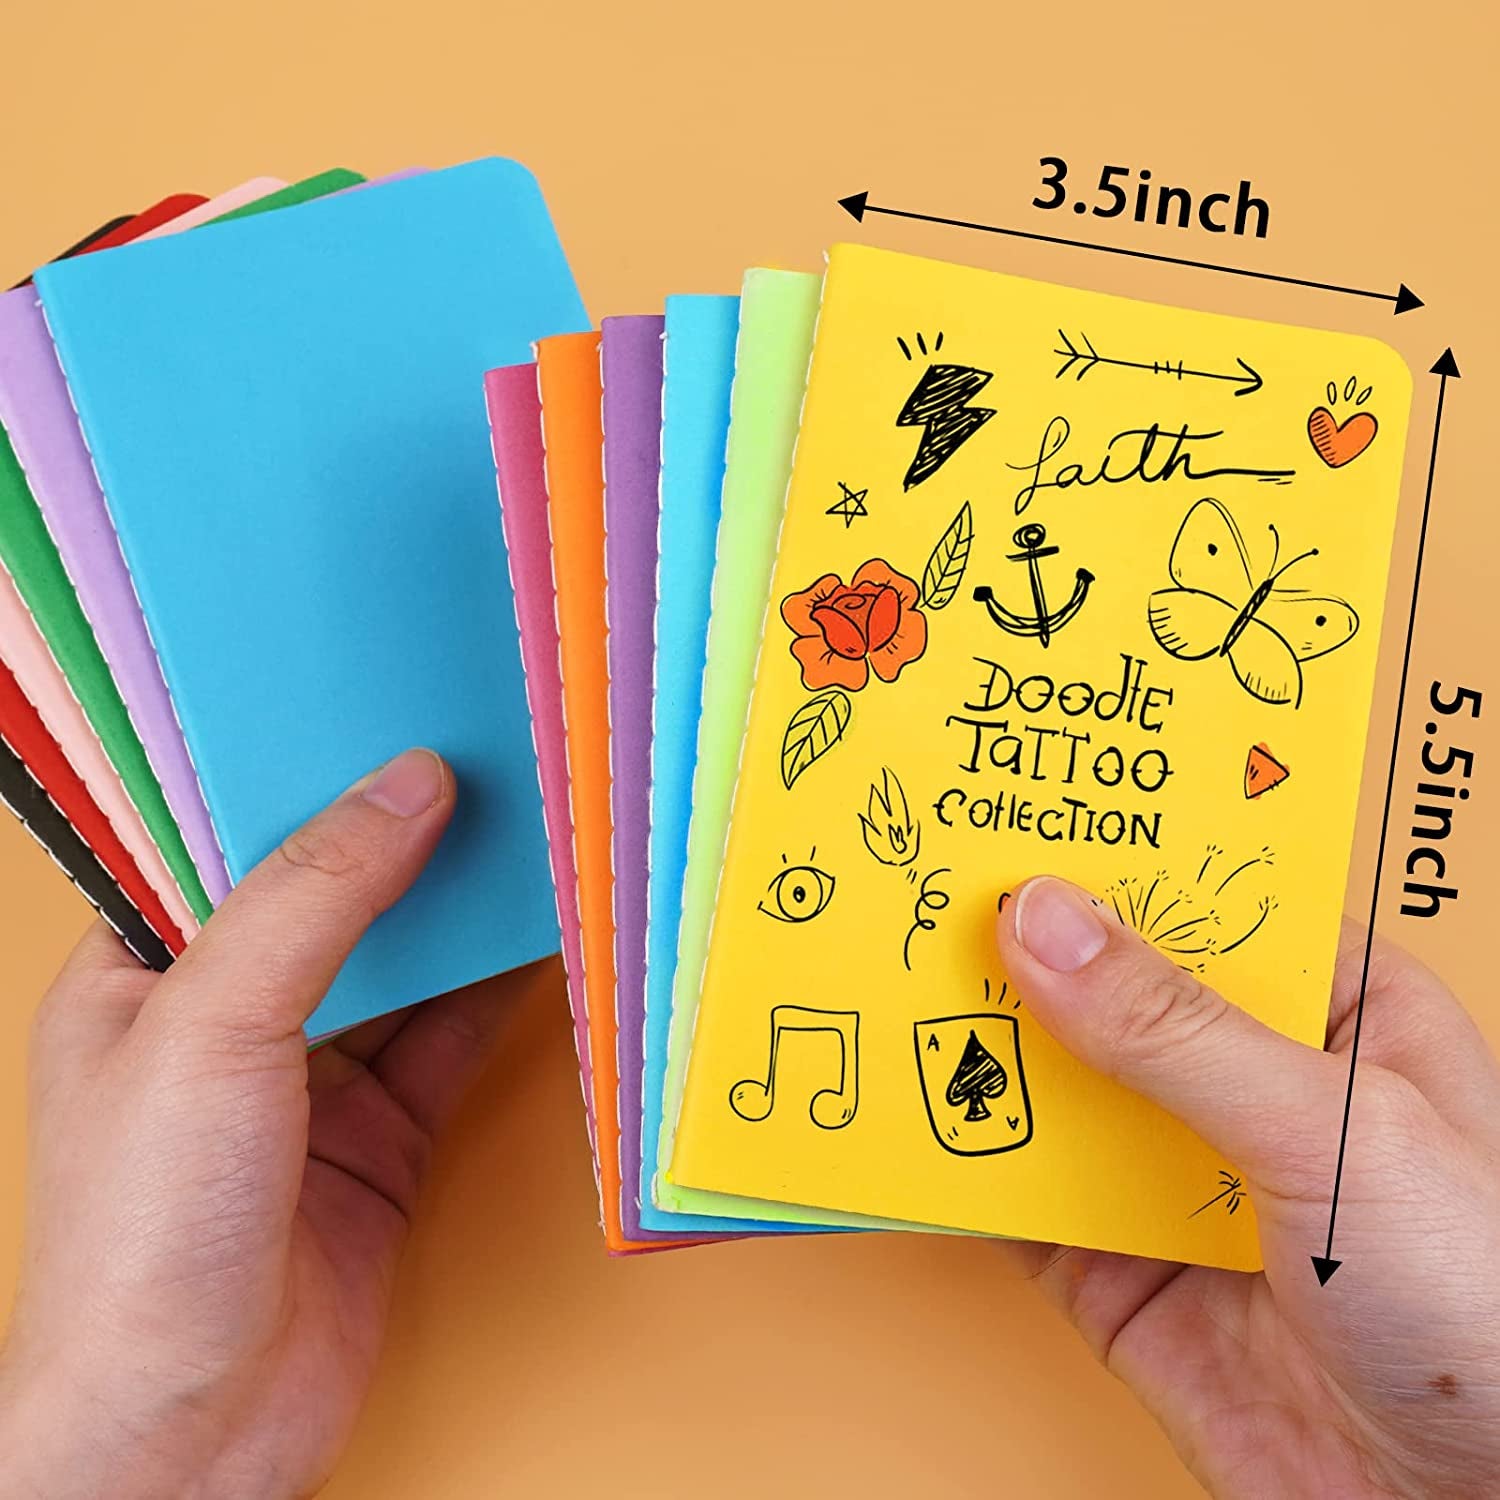 Small Lined Notepads Bulk 60 Pack Mini Journal Pocket Notebooks Set Colorful Cover Notebooks for Kids 3.5 X 5.5 Inches, 30 Sheets/60 Pages